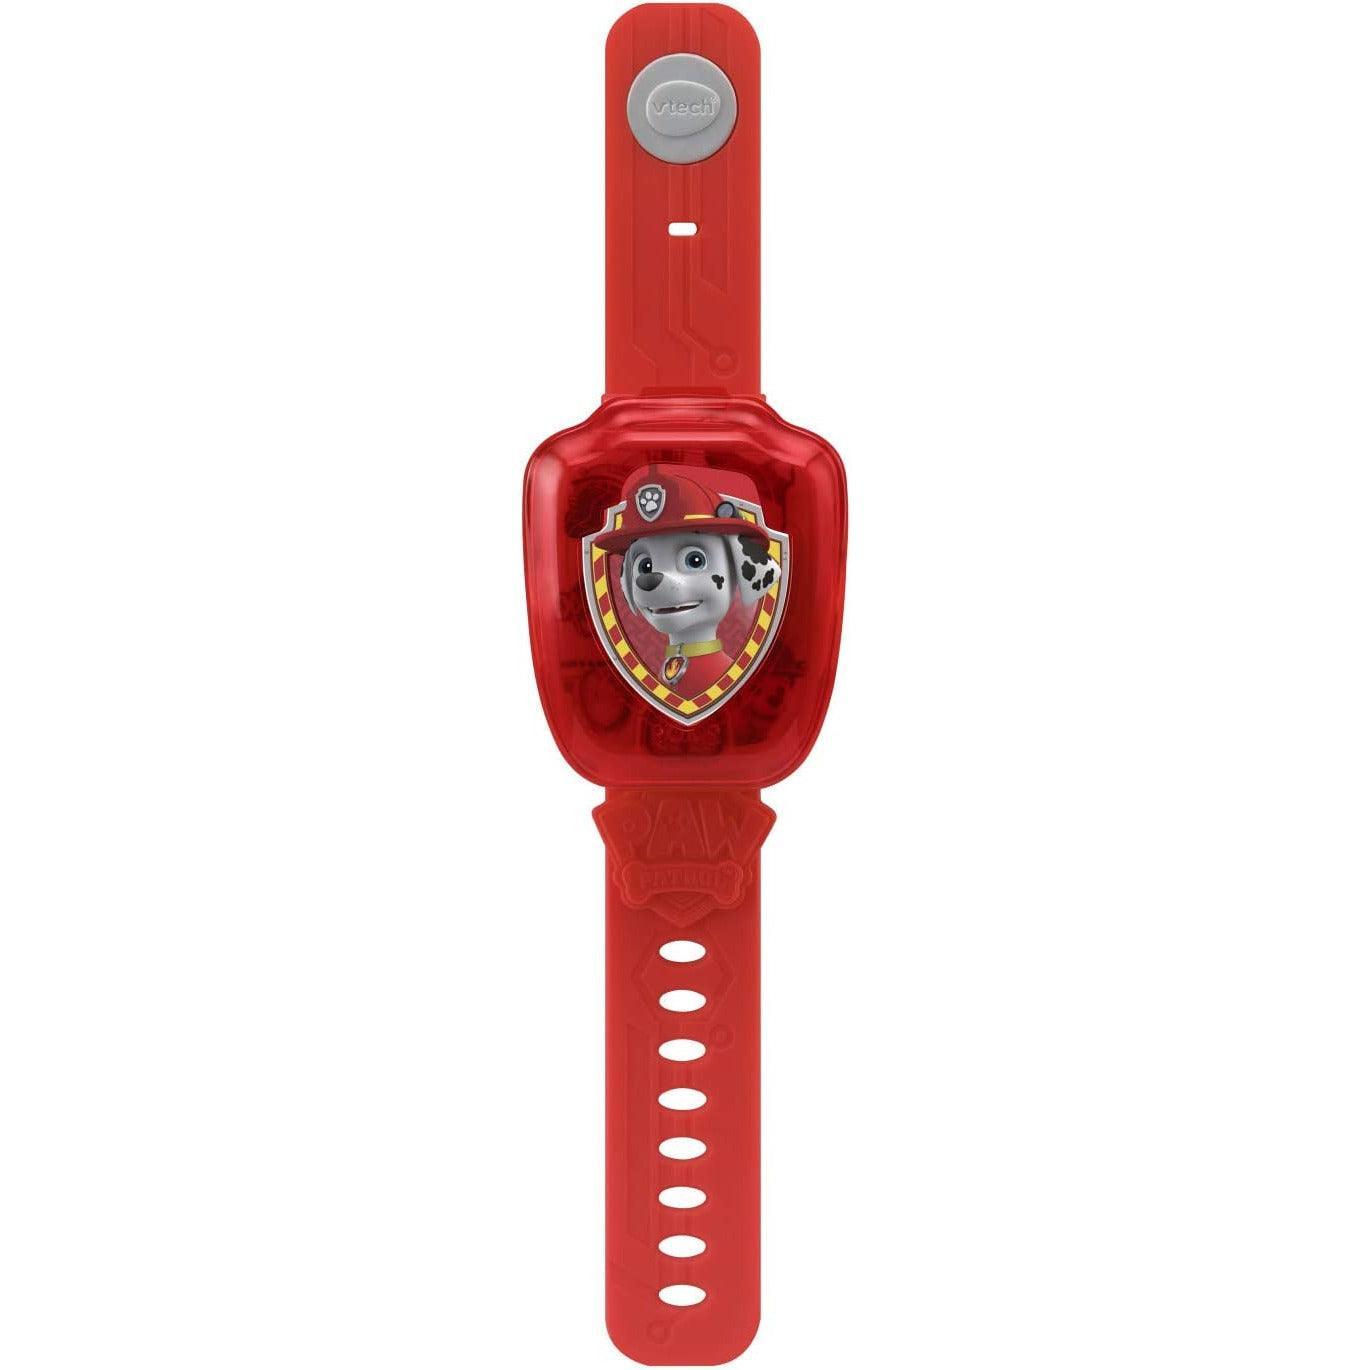 VTech PAW Patrol Marscall Learning Watch - Red - BumbleToys - 5-7 Years, Boys, Girls, Kids, Paw Patrol, Pre-Order, Watch